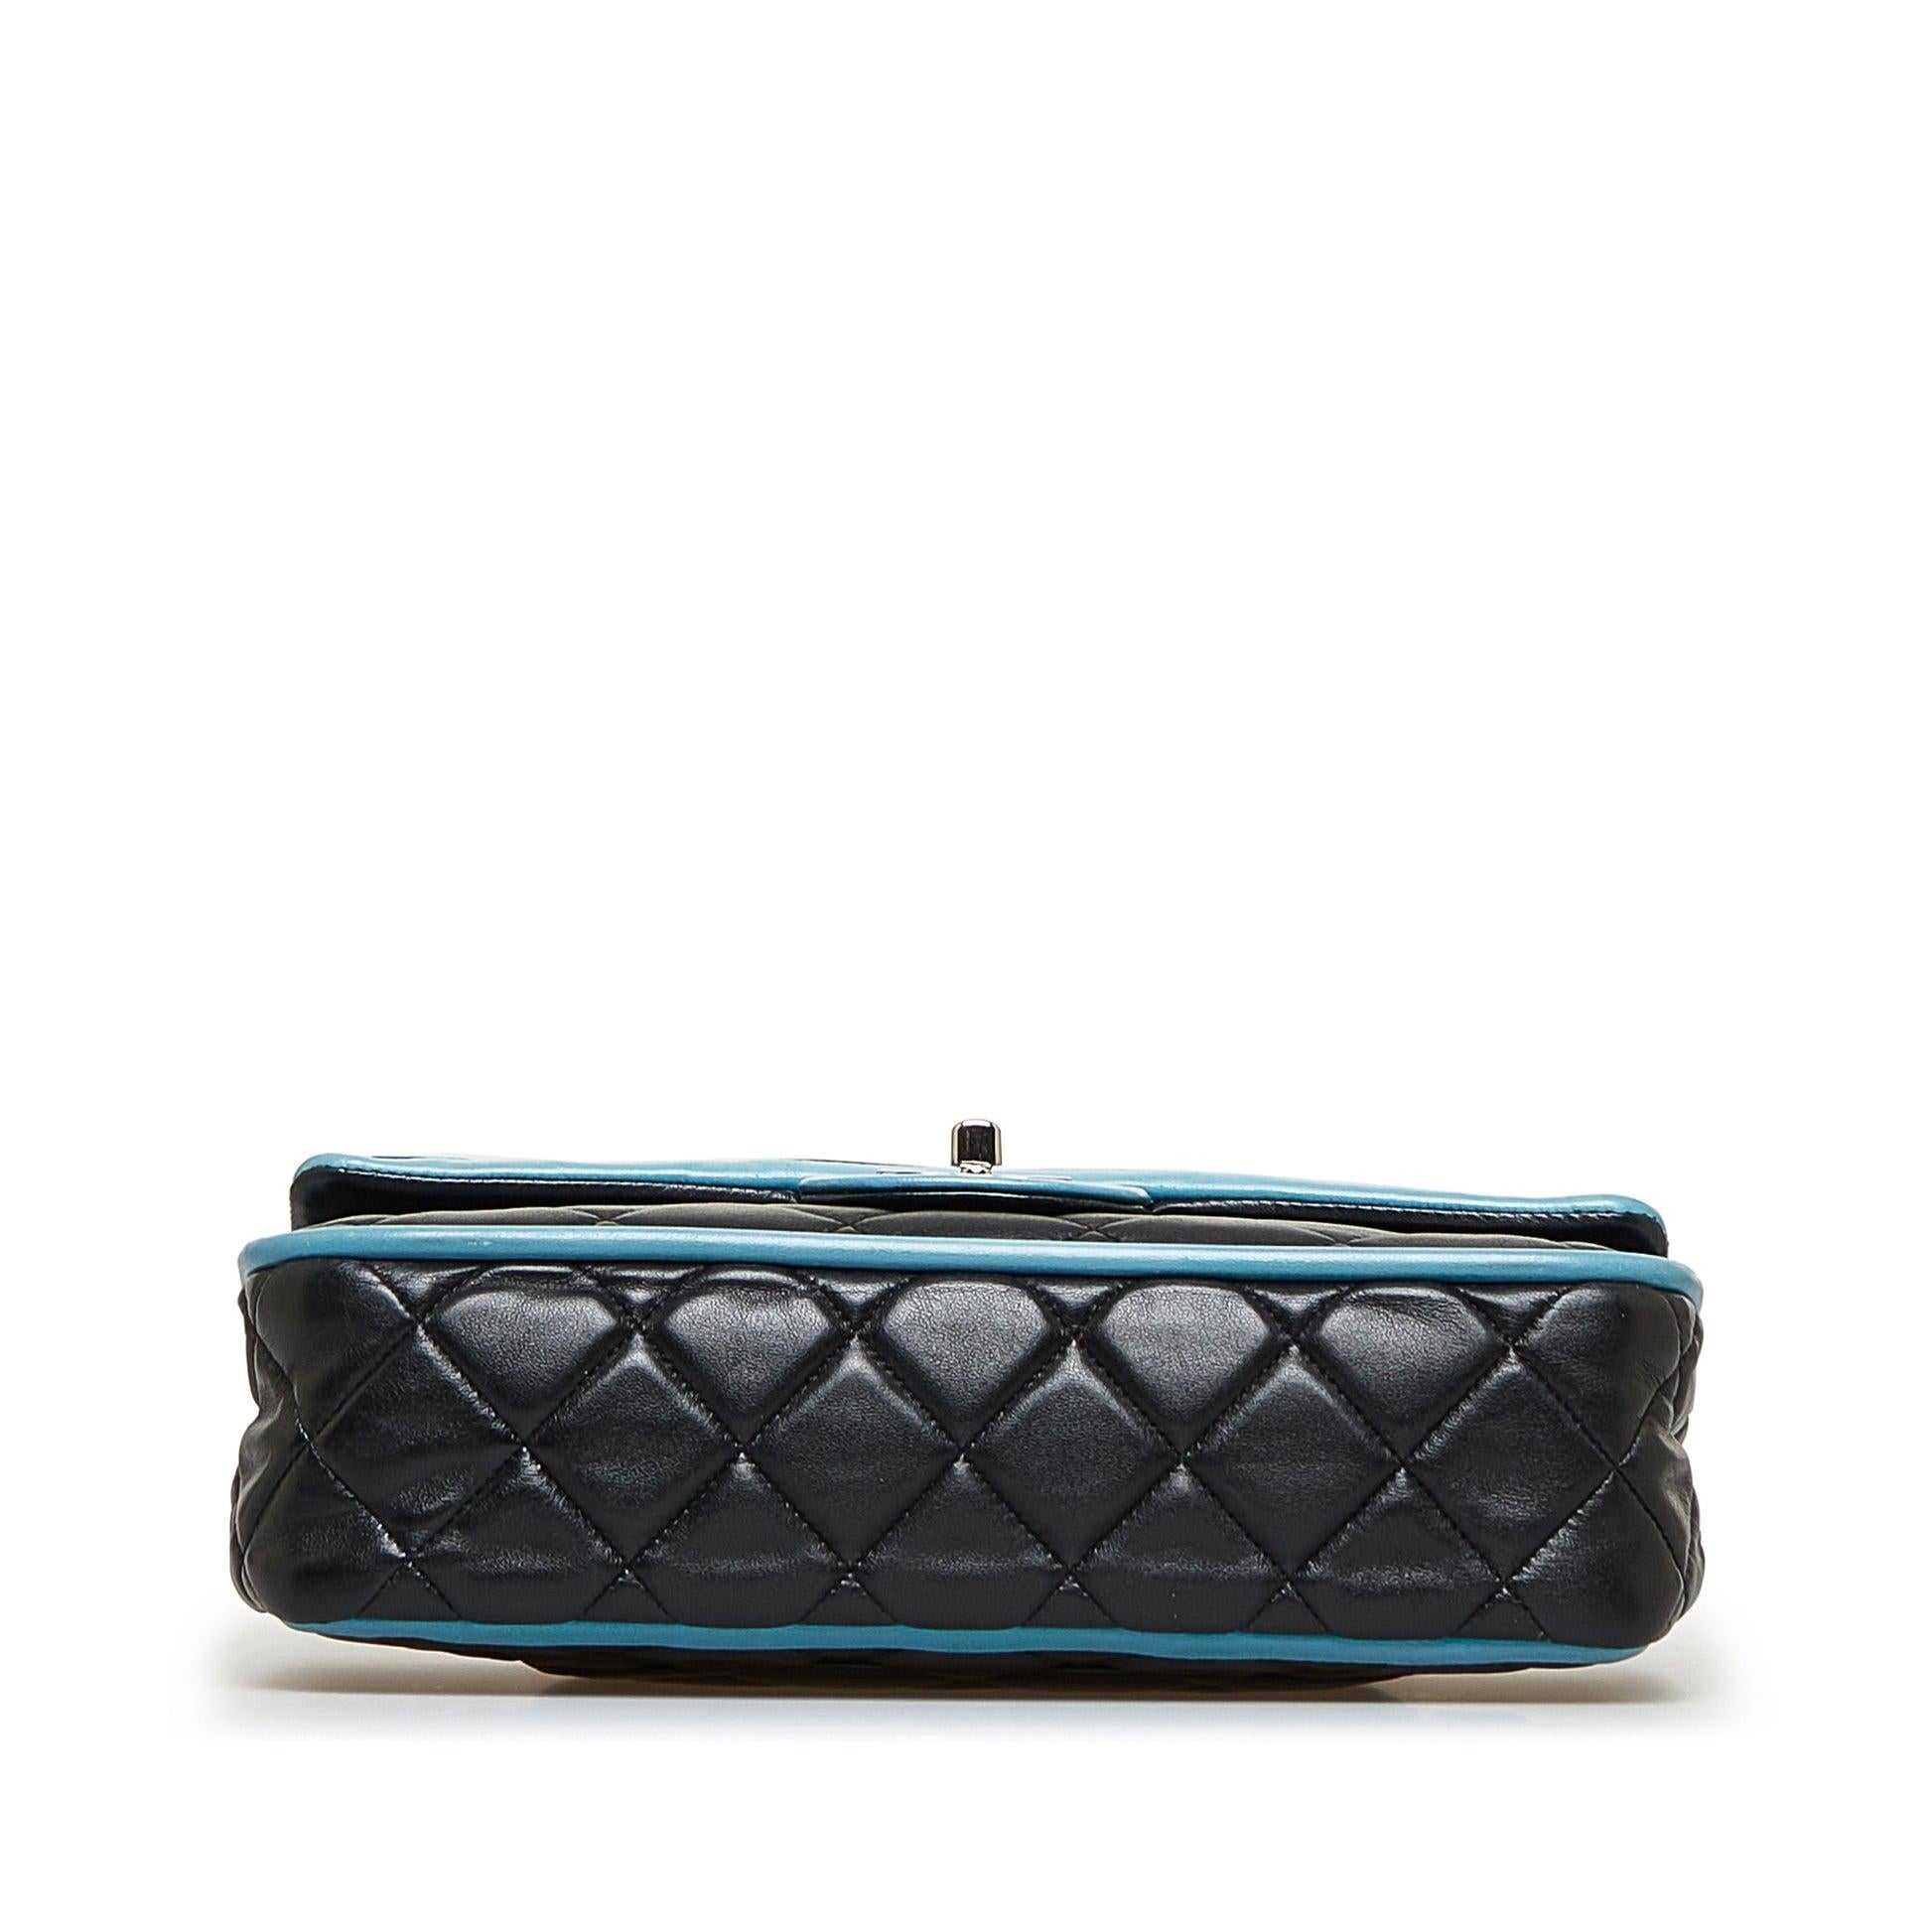 Chanel 2006 Medium Double Classic Flap in Black Lambskin Turquoise Piping Bag For Sale 8